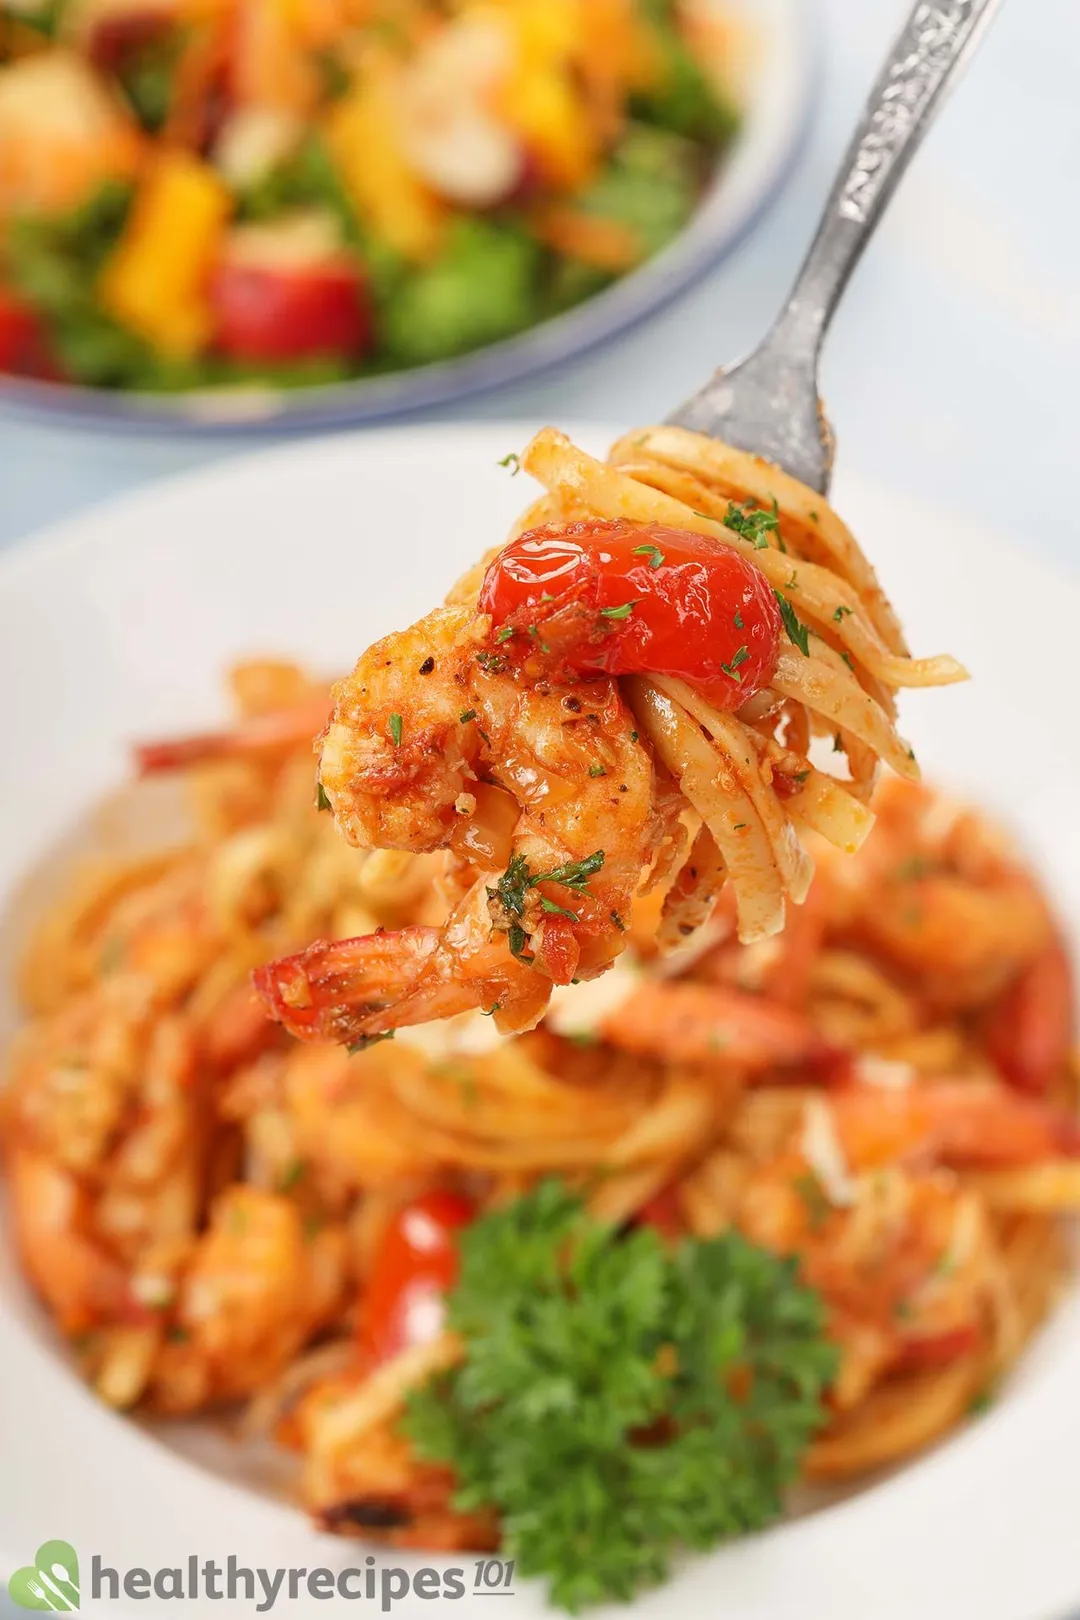 What to Serve With Shrimp Fra Diavolo